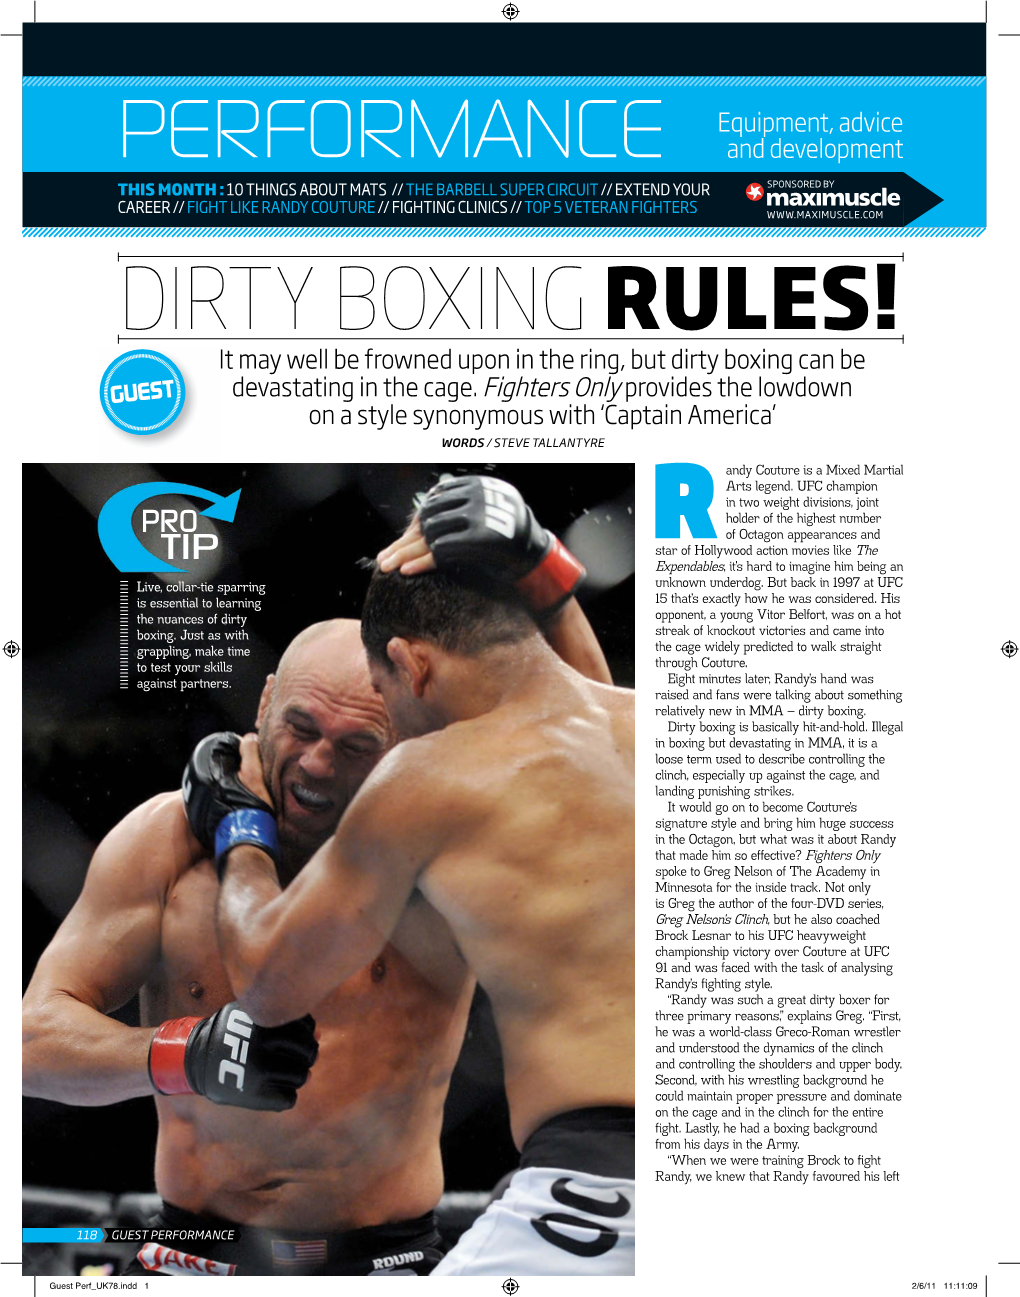 DIRTY BOXING RULES! It May Well Be Frowned Upon in the Ring, but Dirty Boxing Can Be GUEST Devastating in the Cage